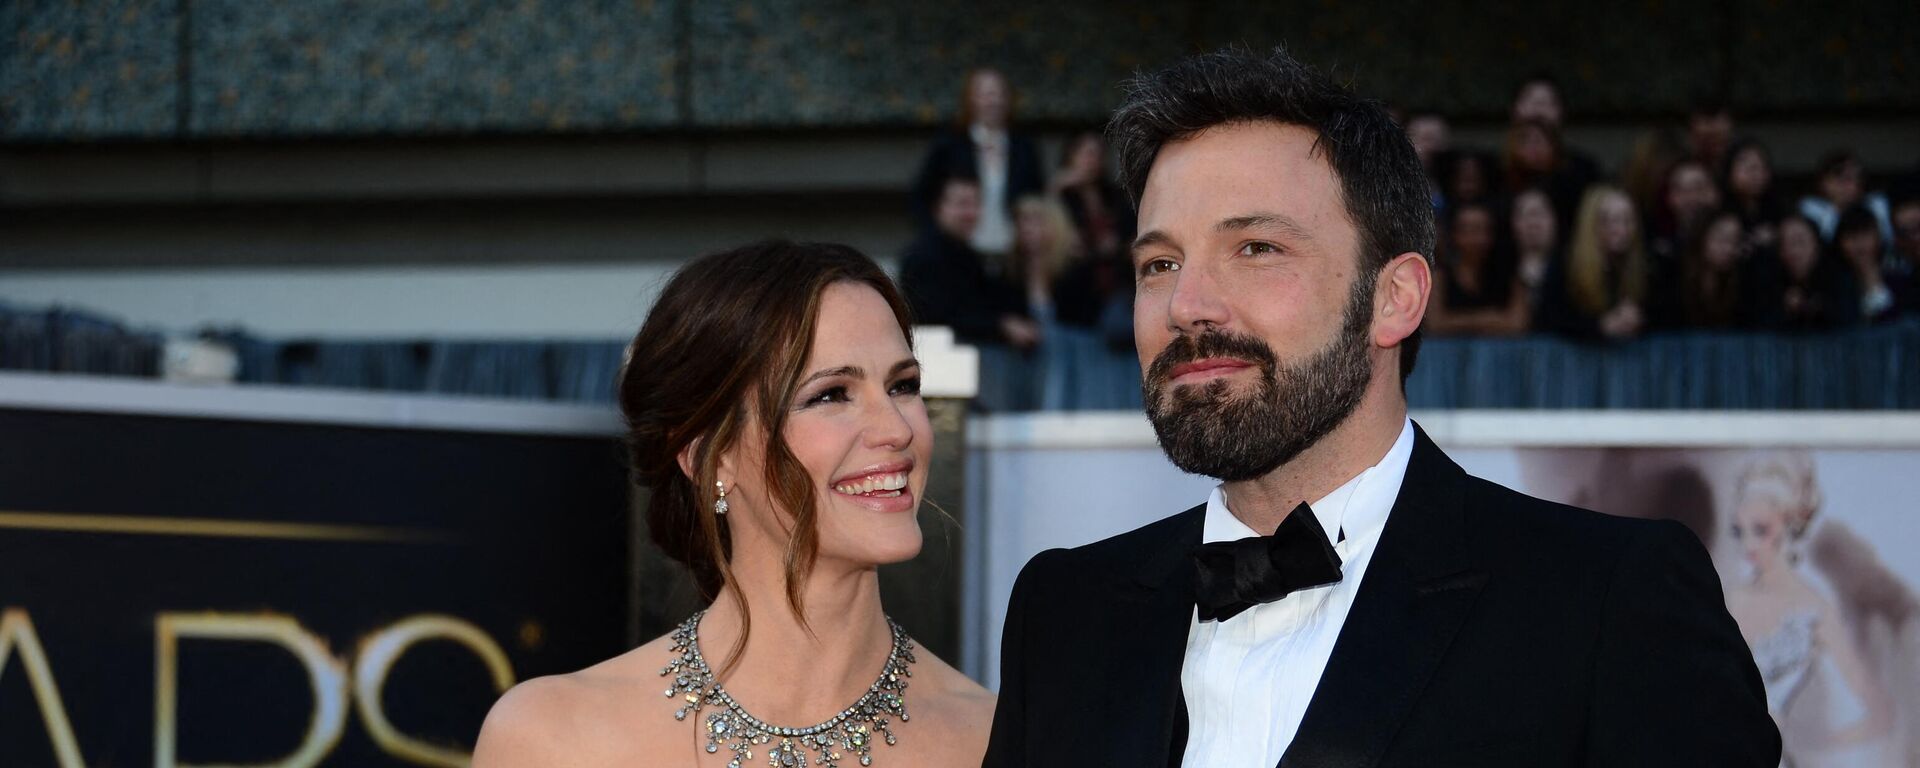 Actor/director Ben Affleck and wife actress Jennifer Garner arrive on the red carpet for the 85th Annual Academy Awards on February 24, 2013 in Hollywood, California - Sputnik International, 1920, 15.12.2021